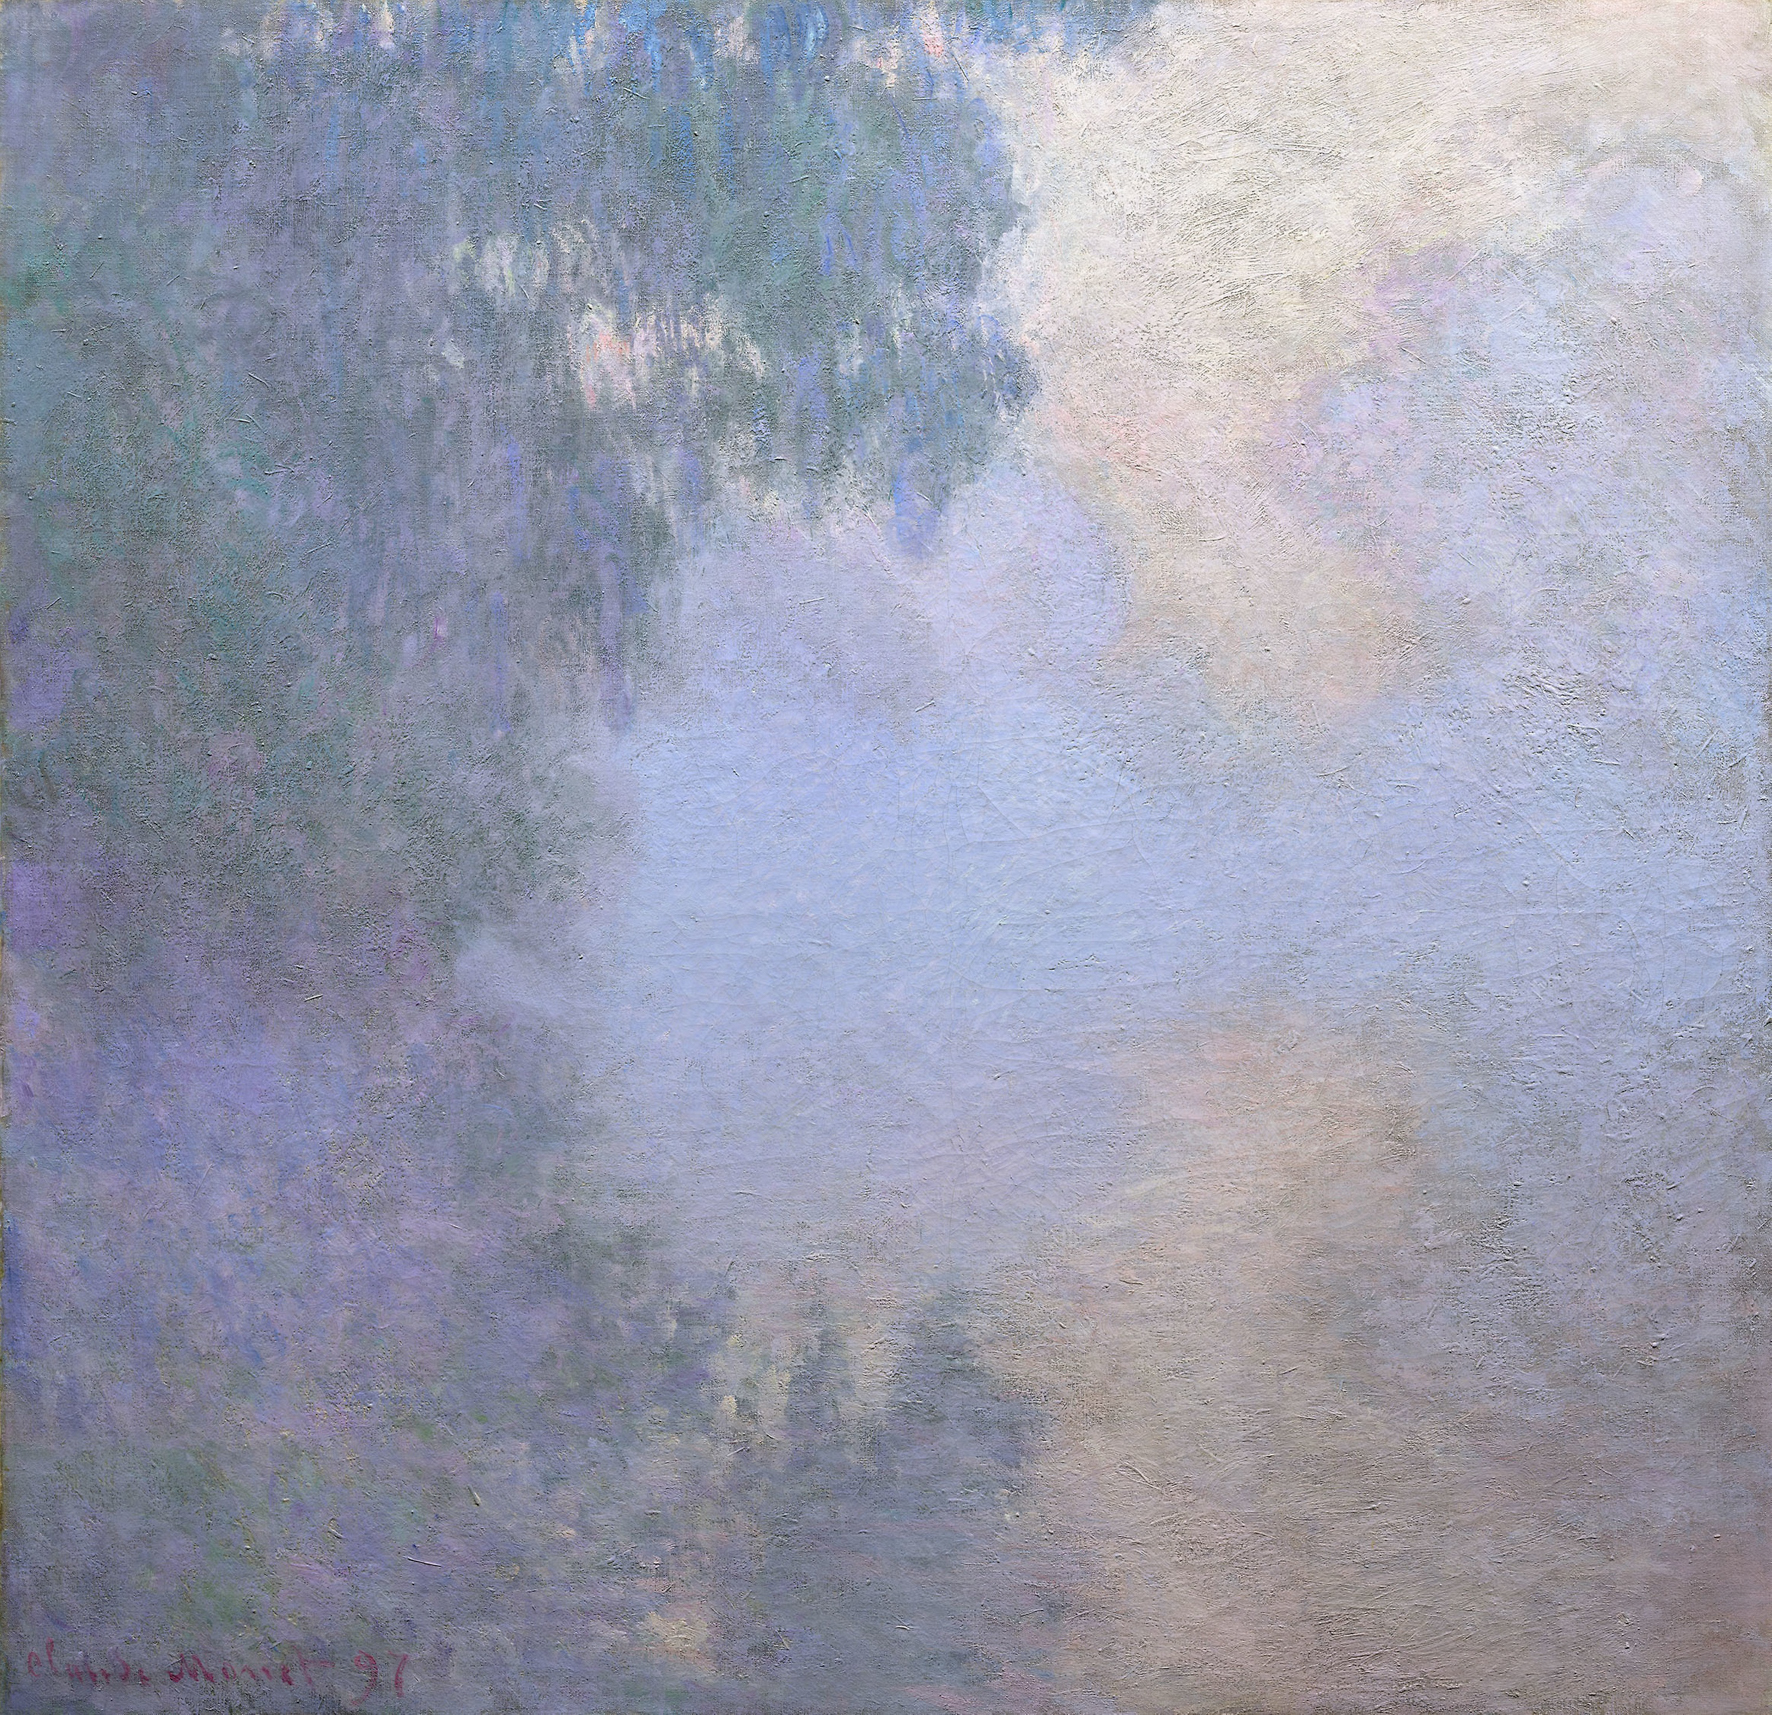 Painting by Claude Monet, Branch of the Seine near Giverny (Mist) (1897)